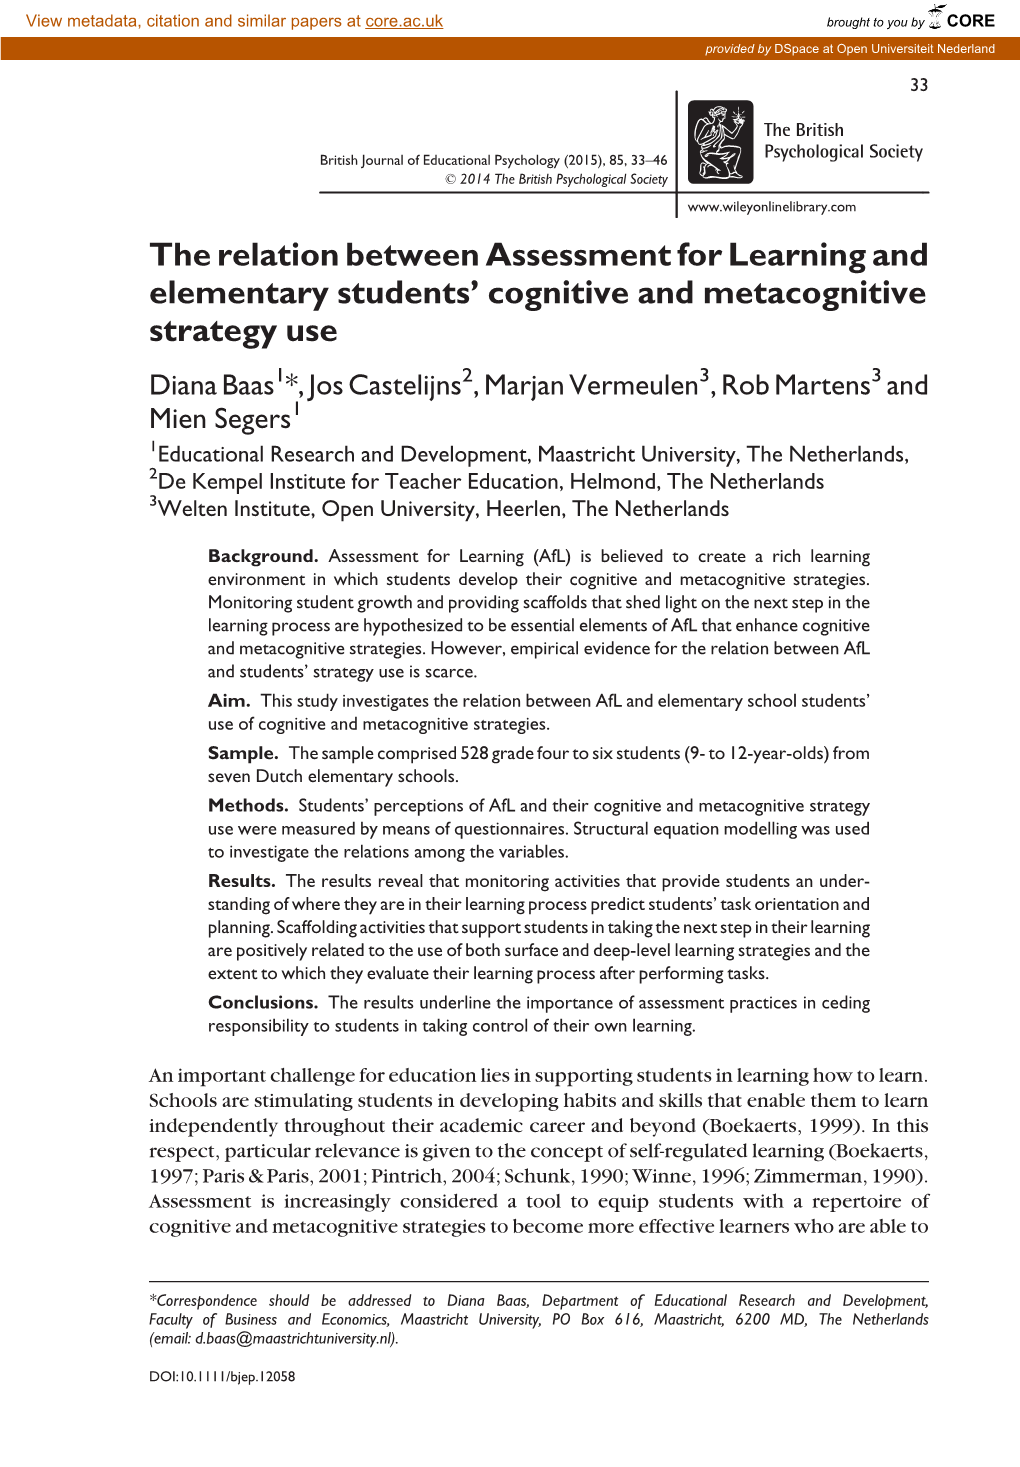 The Relation Between Assessment for Learning and Elementary Students&